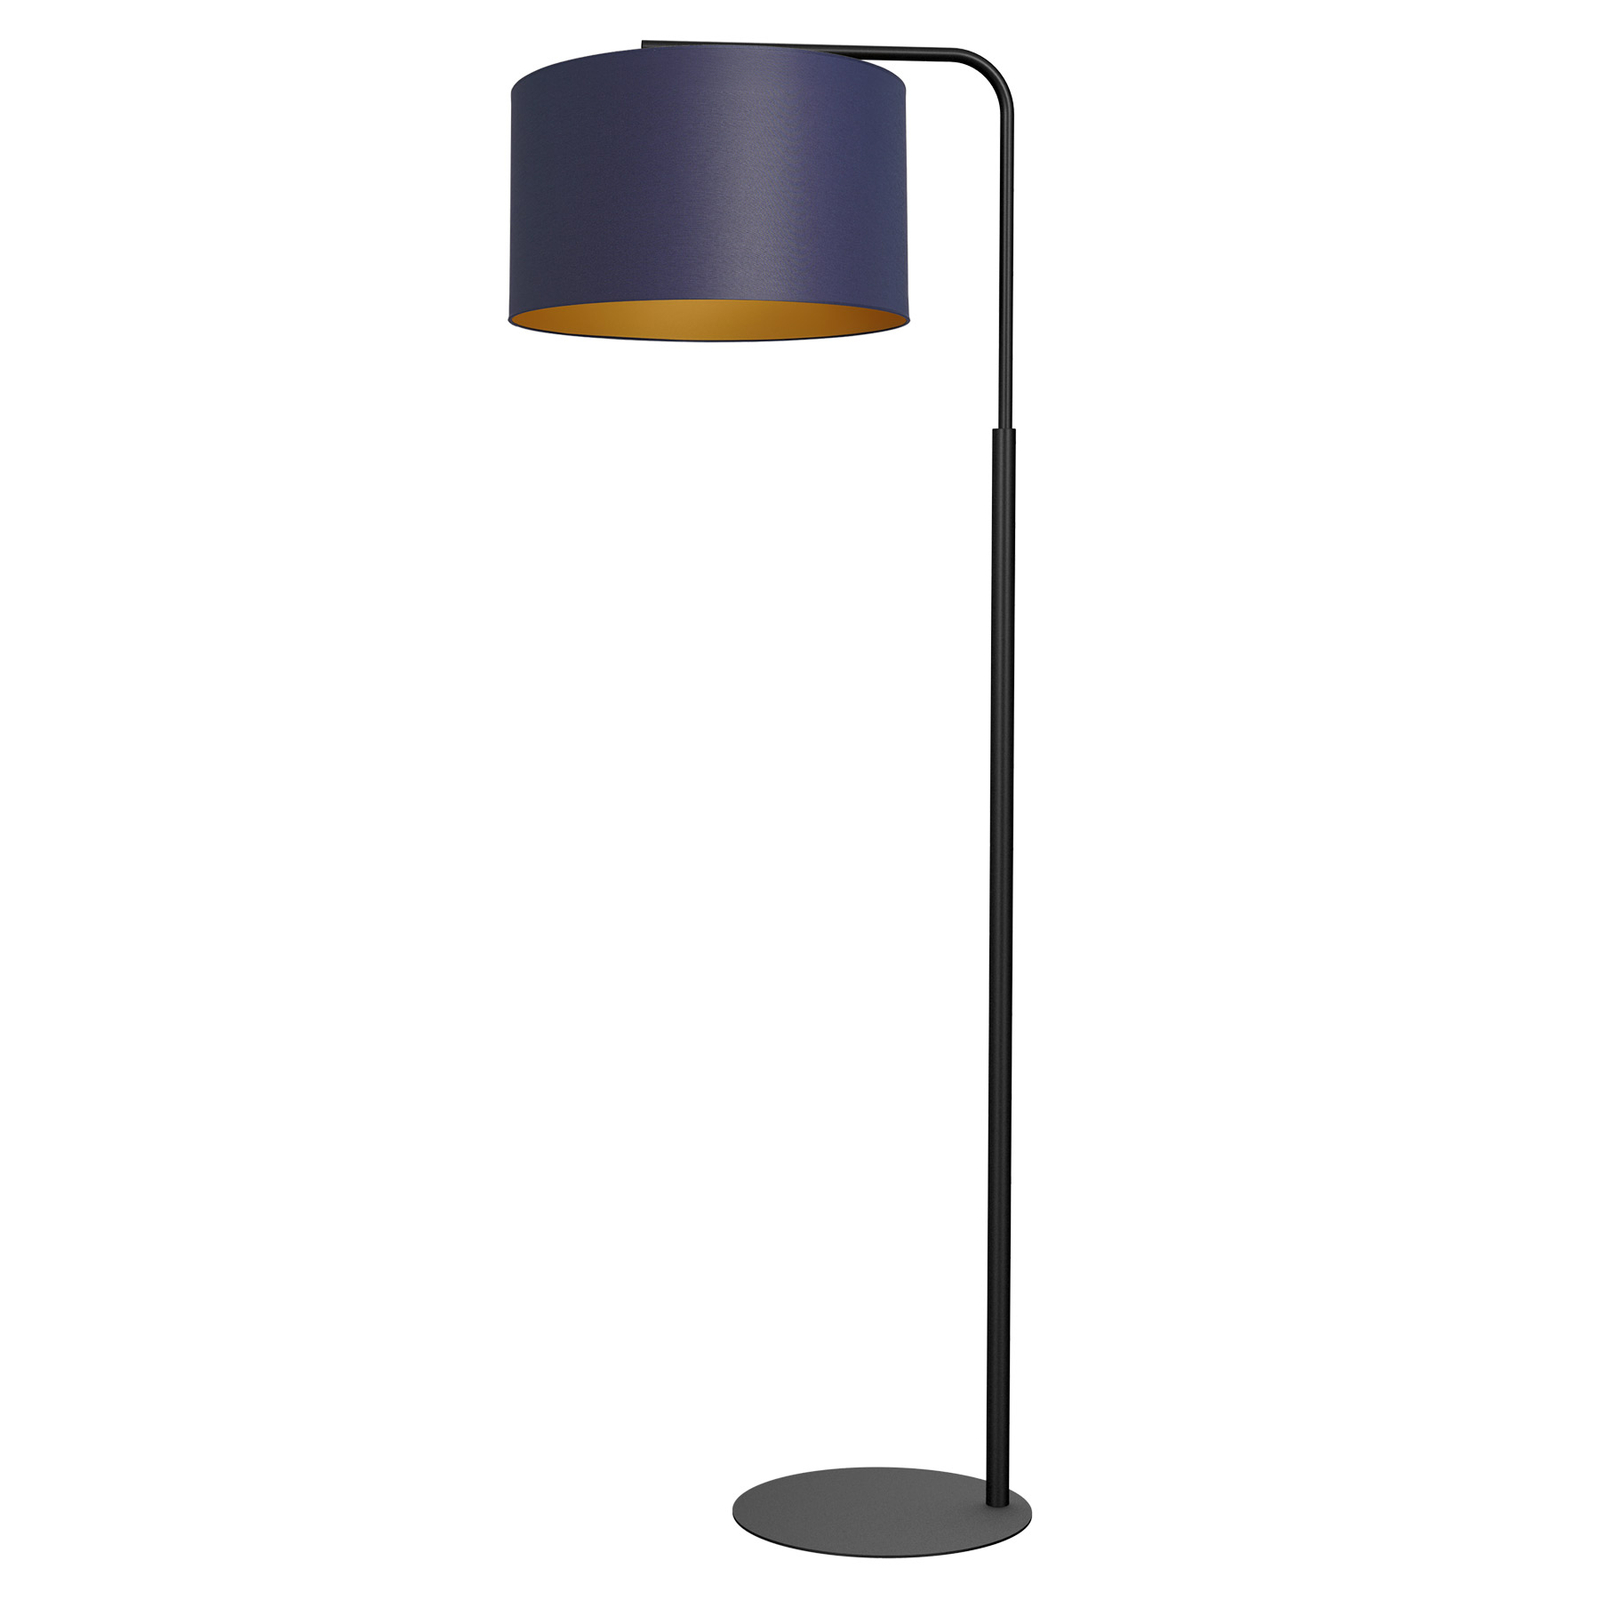 Soho floor lamp, cylindrical, curved, blue/gold